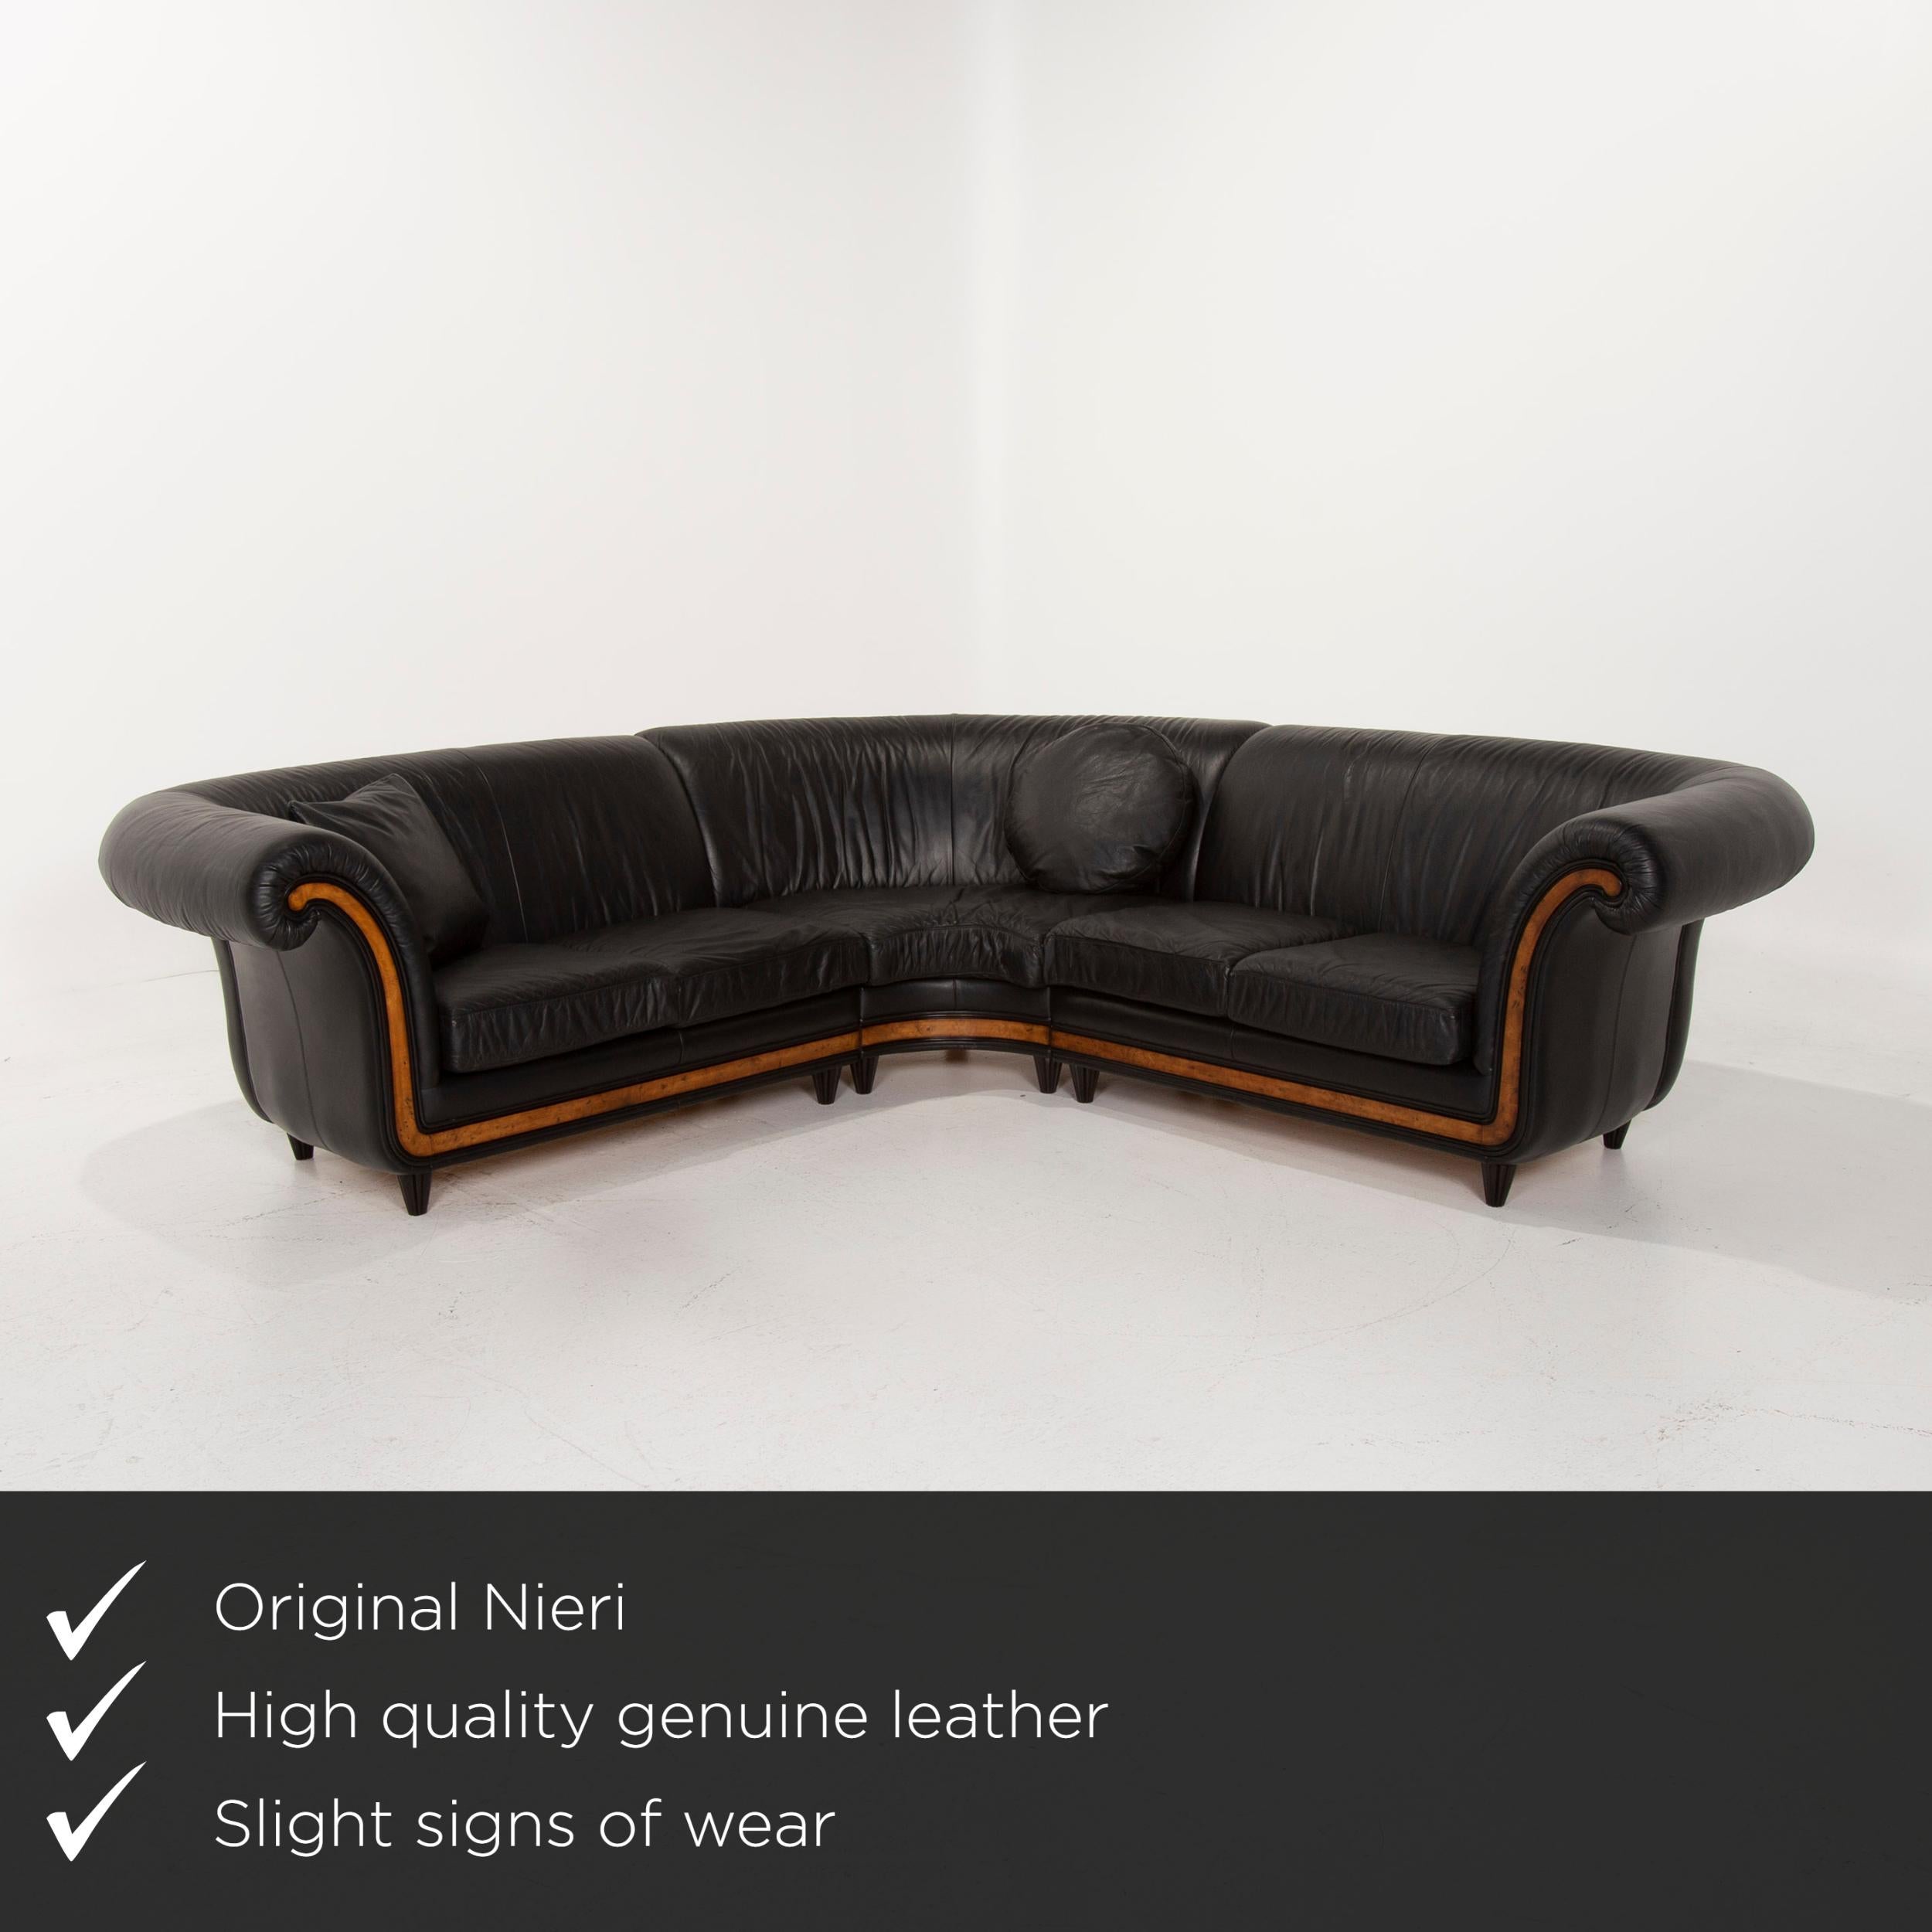 We present to you a Nieri leather sofa black corner sofa.

 

 Product measurements in centimetres:
 

 depth: 101
 width: 279
 height: 81
 seat height: 45
 rest height: 81
 seat depth: 57
 seat width: 166
 back height: 38.